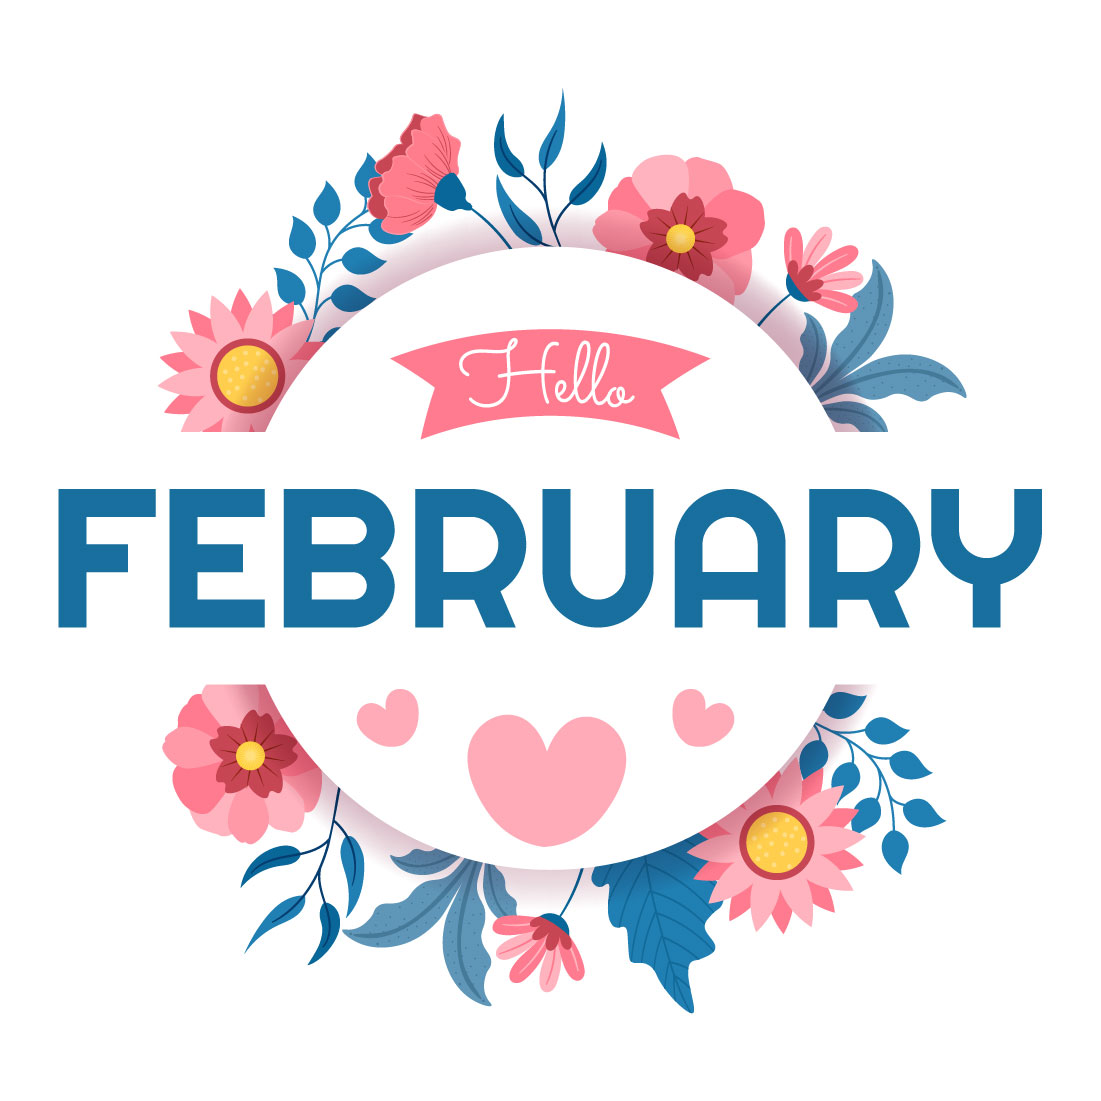 Image with charming inscription hello february and flowers.